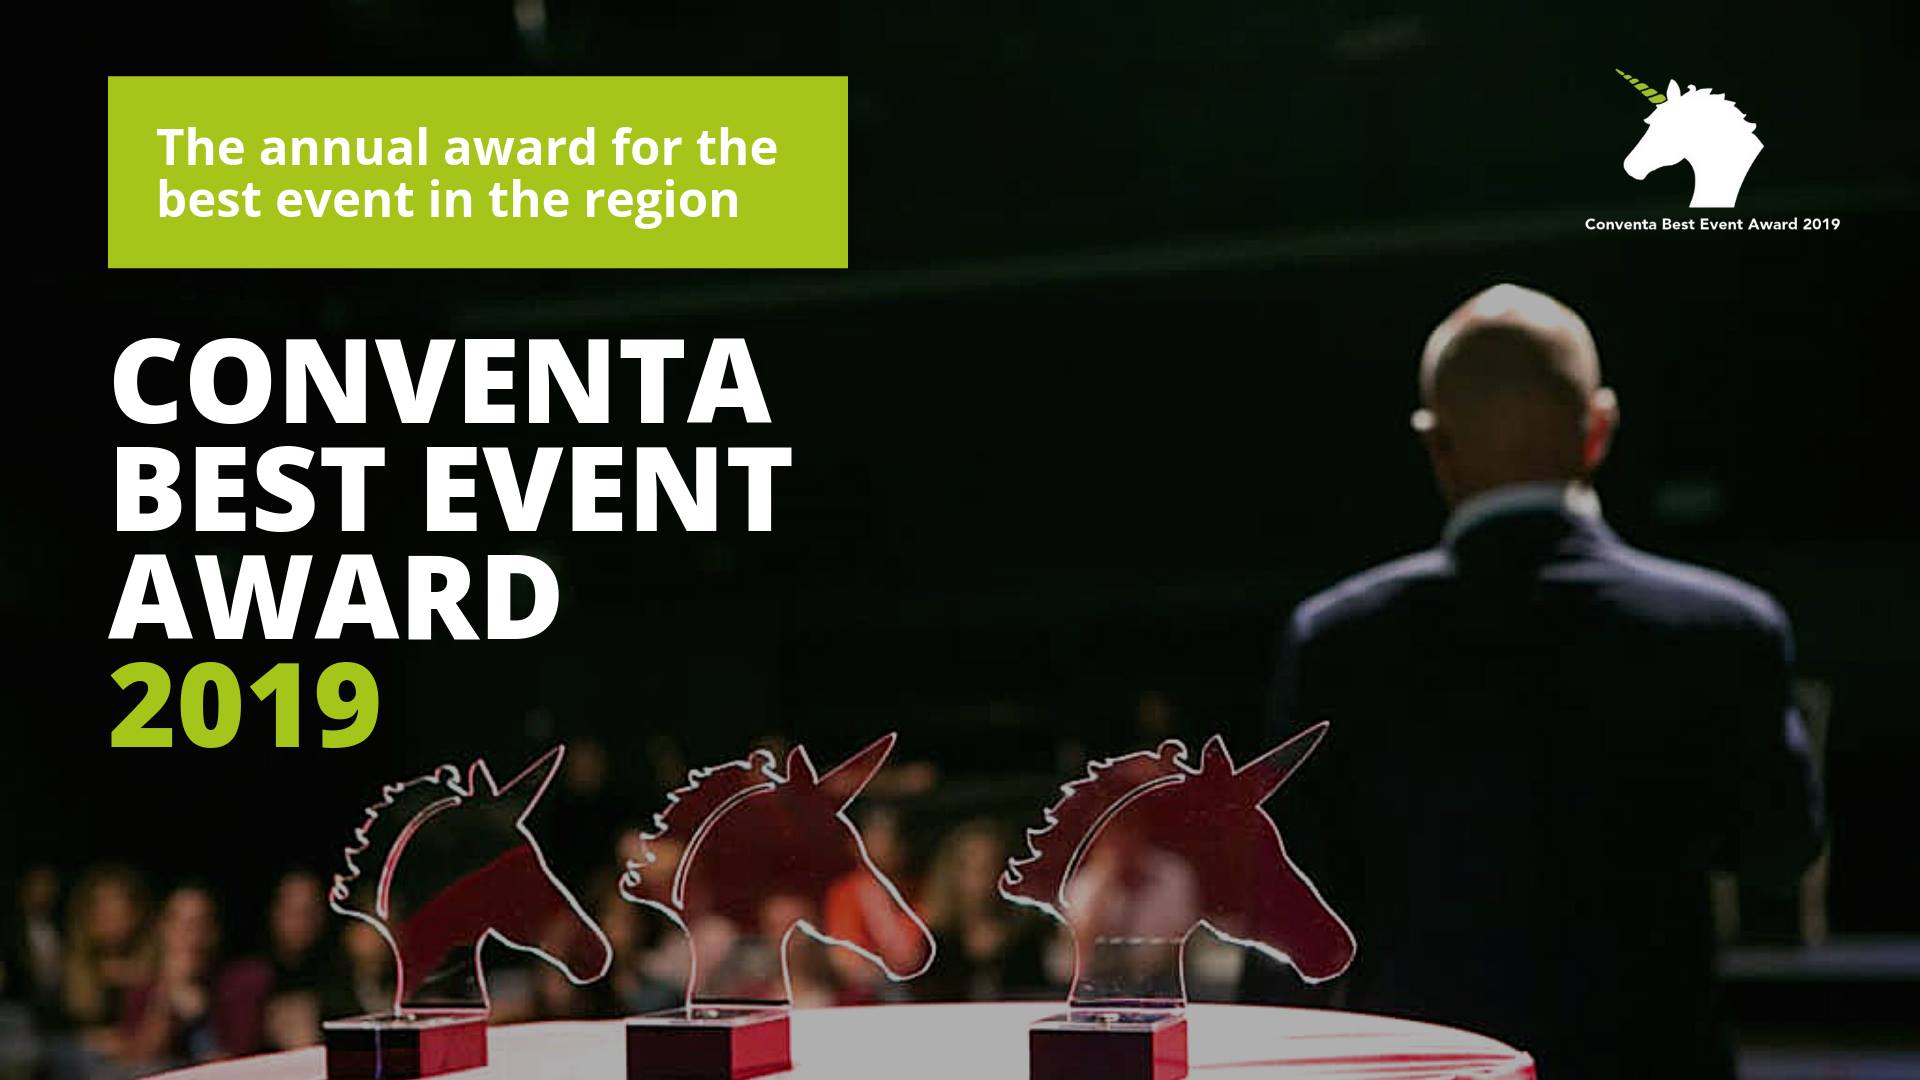 Conventa “Best event award” – Winner of the audience